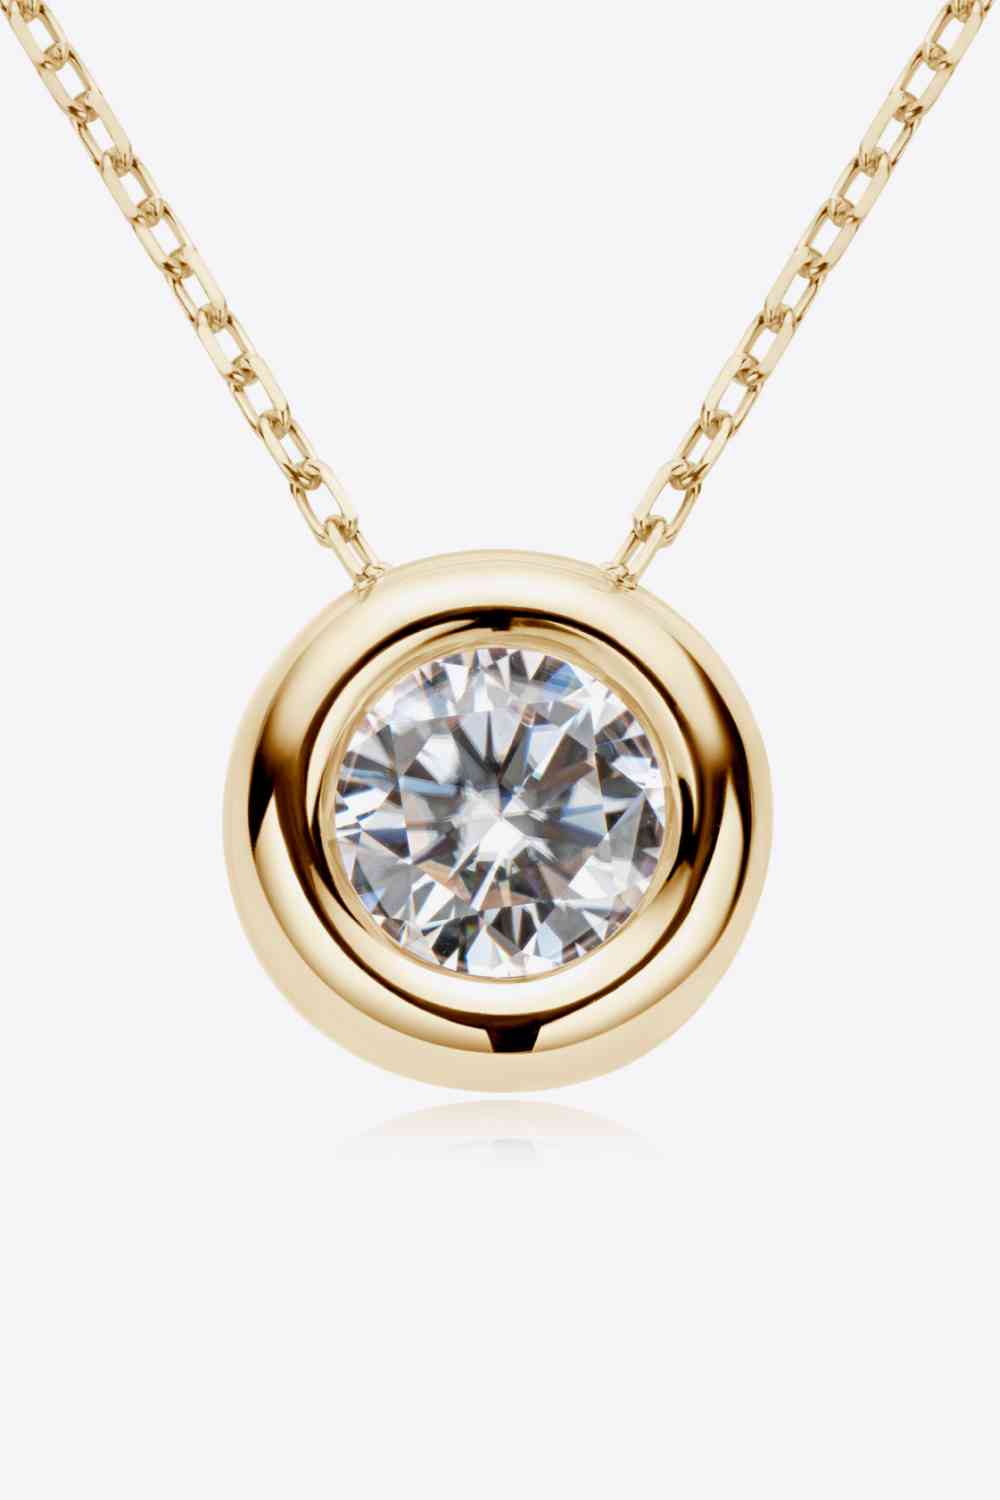 Adored 1 Carat Moissanite Pendant 925 Sterling Silver Necklace Gold One Size